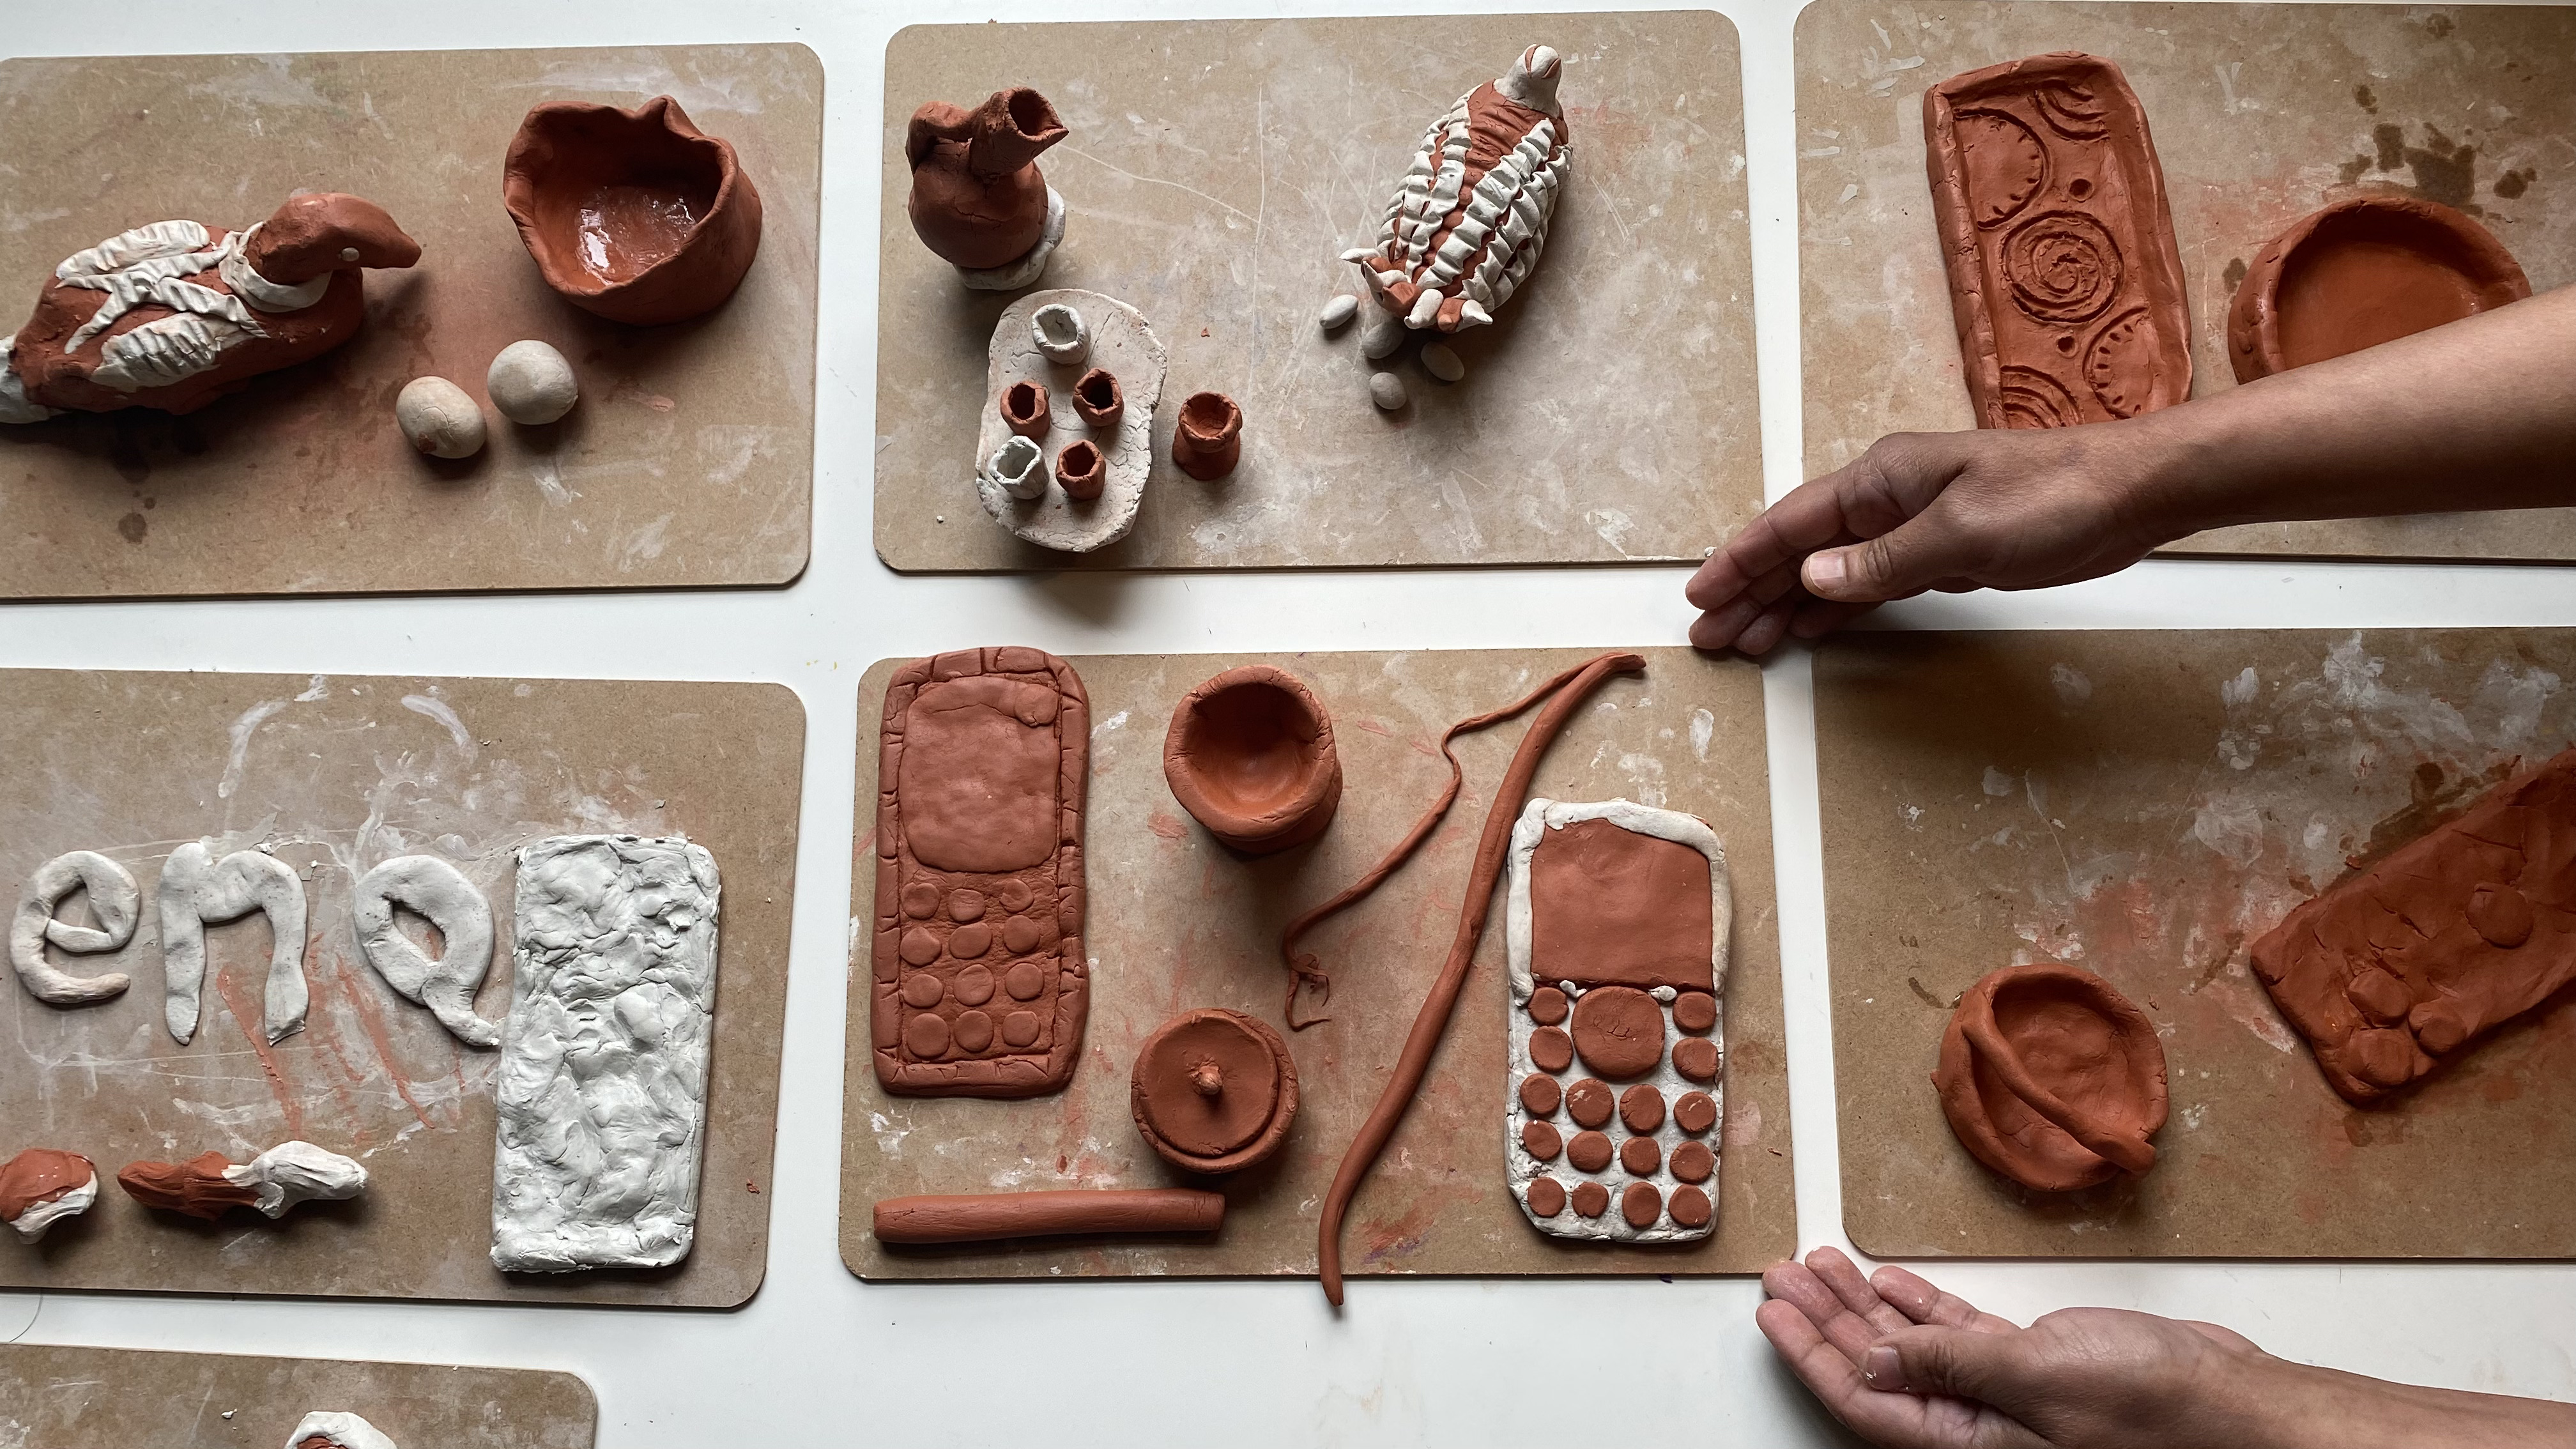 Moulded wet clay objects